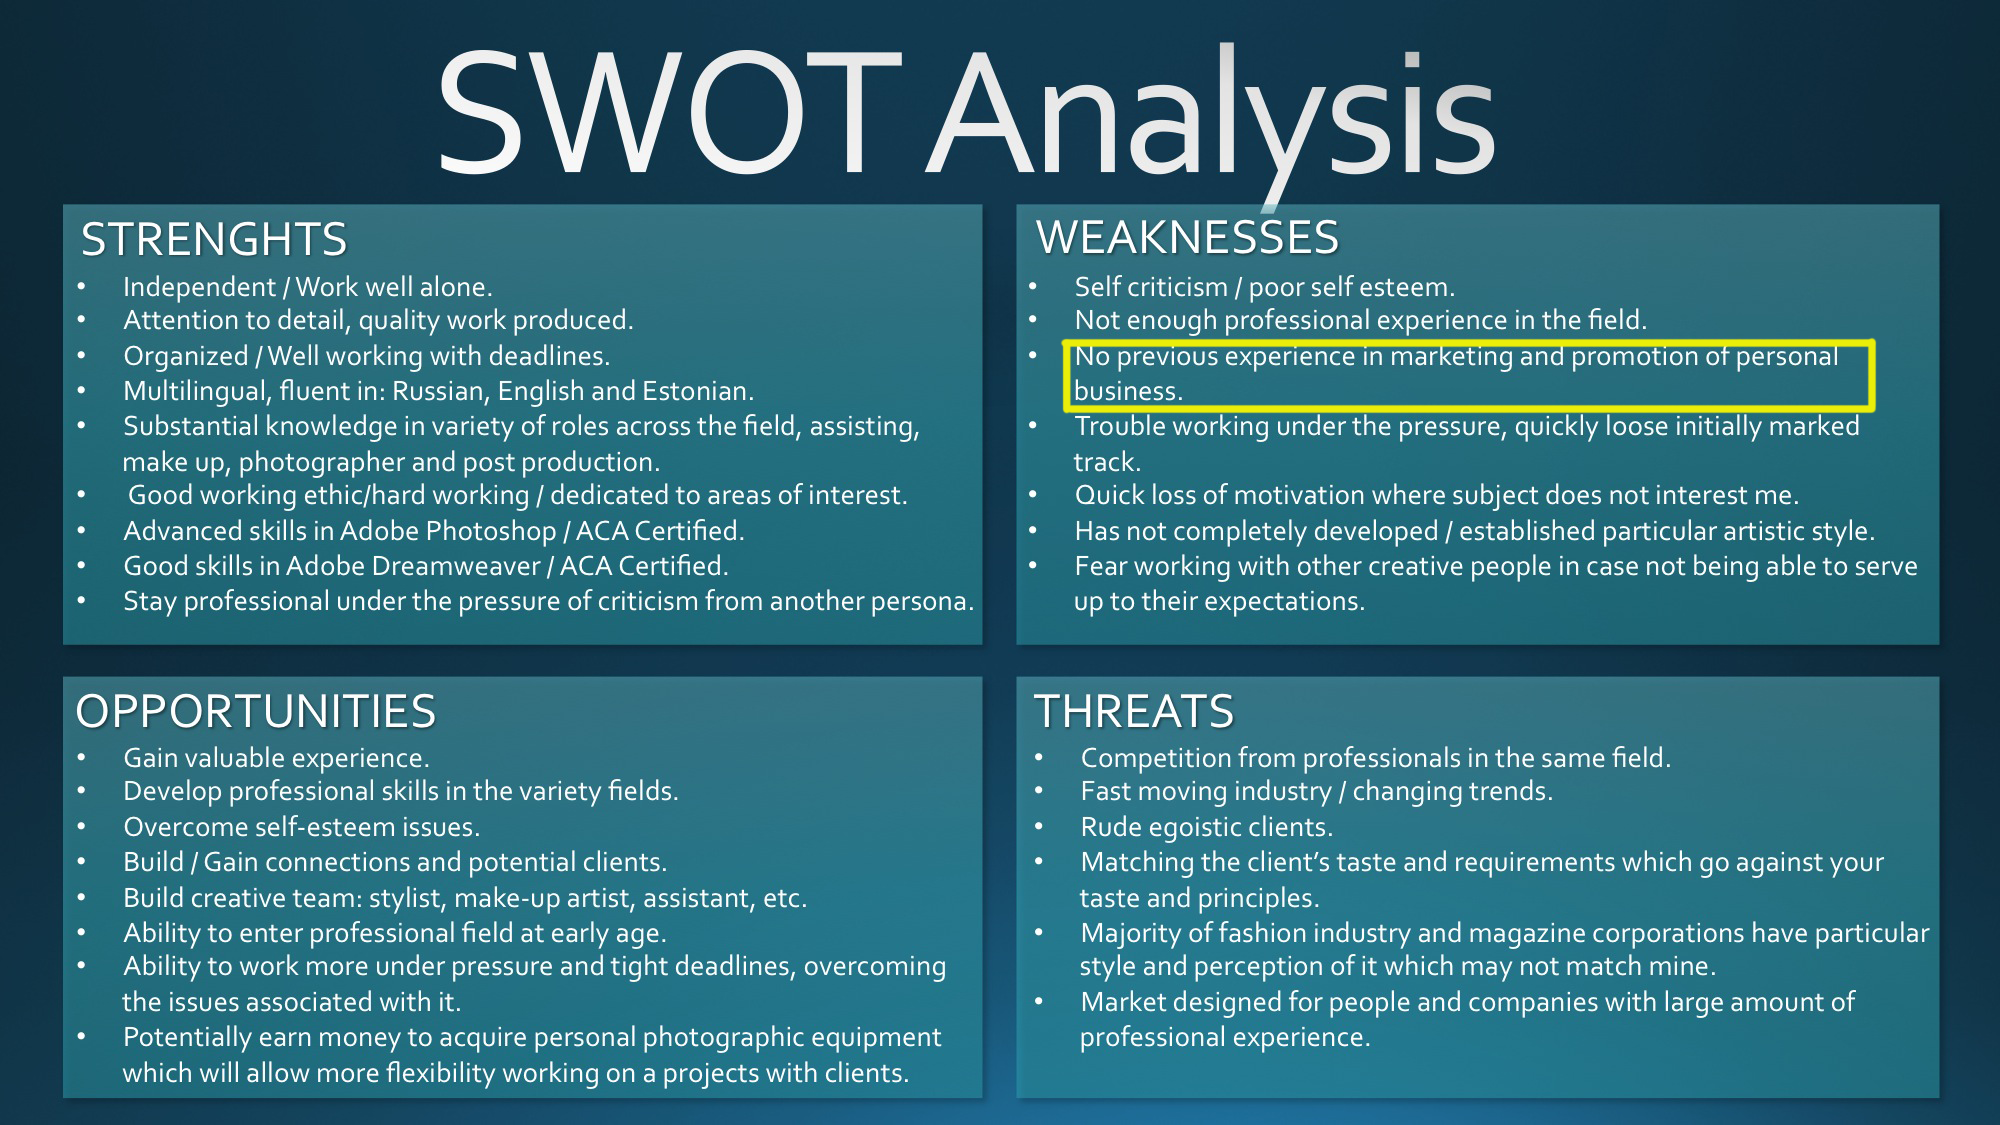 Swot analysis of mnc companies as a whole